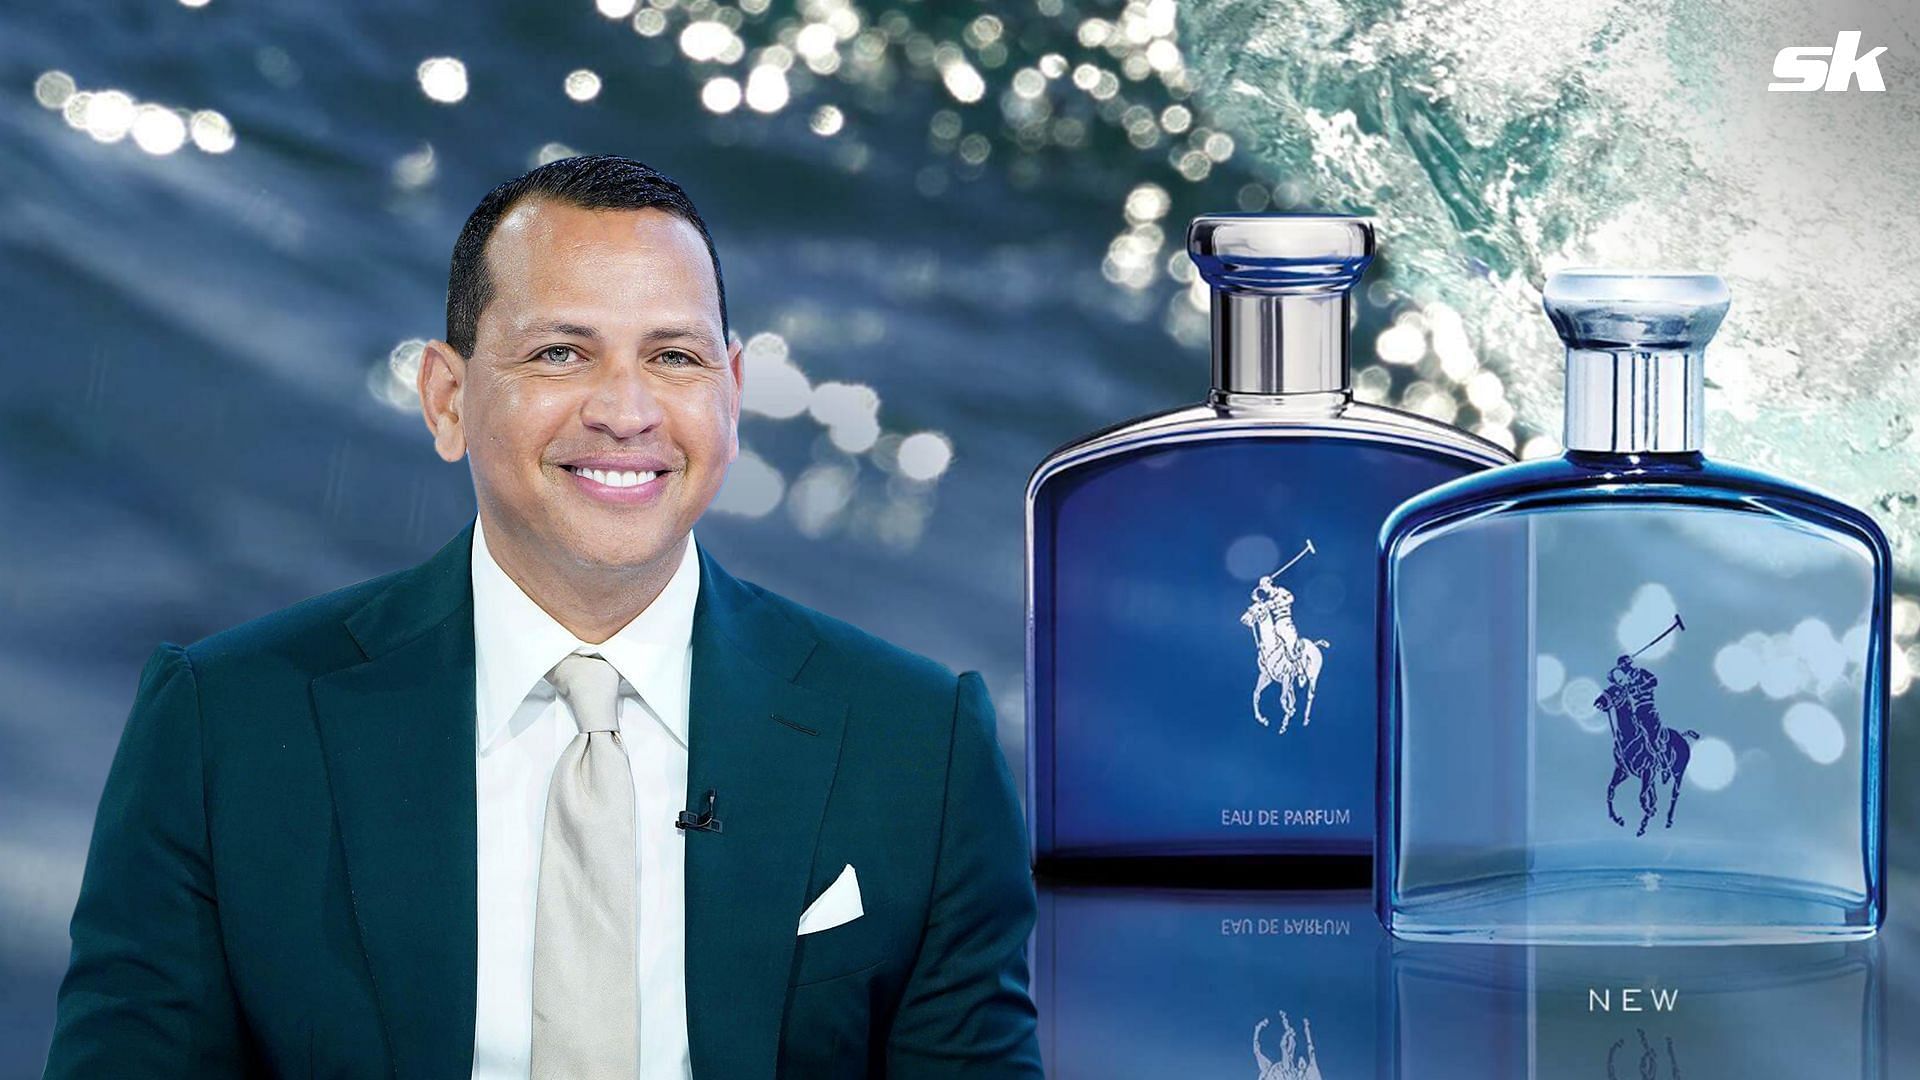 When Alex Rodriguez hit a fragrant partnership with $8,100,000,000 Ralph Lauren for new product launch